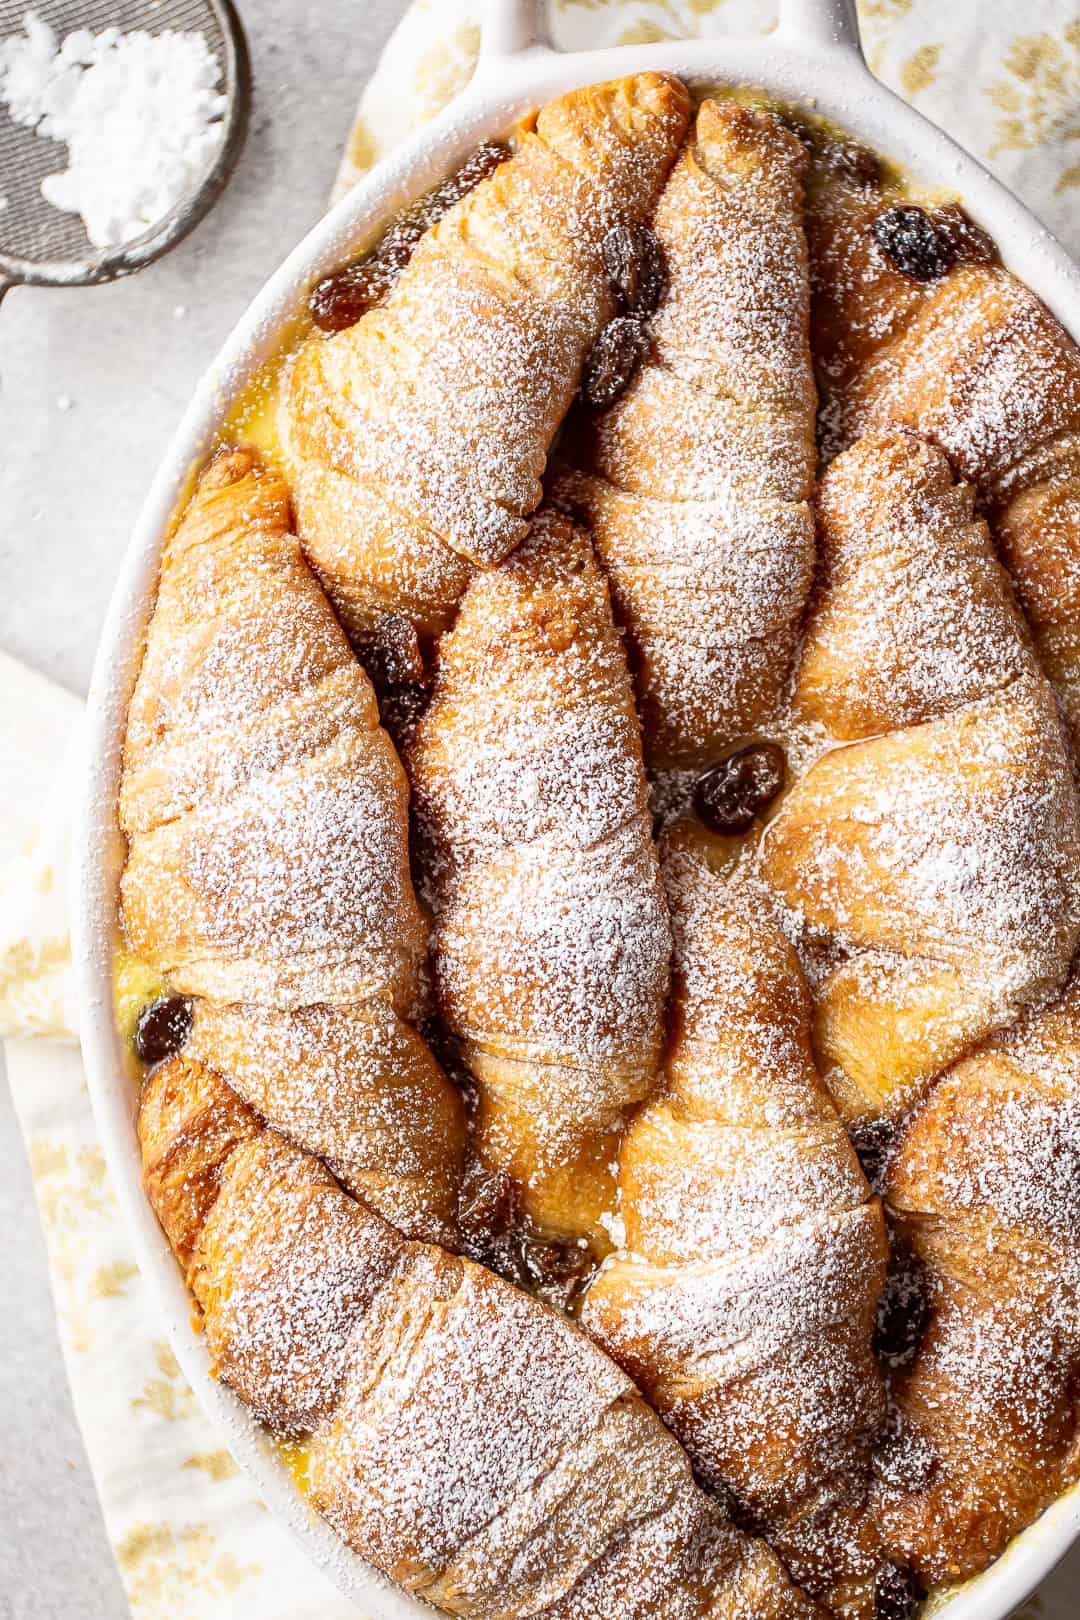 Bread pudding with croissants recipe, speckled with golden raisins and dusted with powdered sugar.